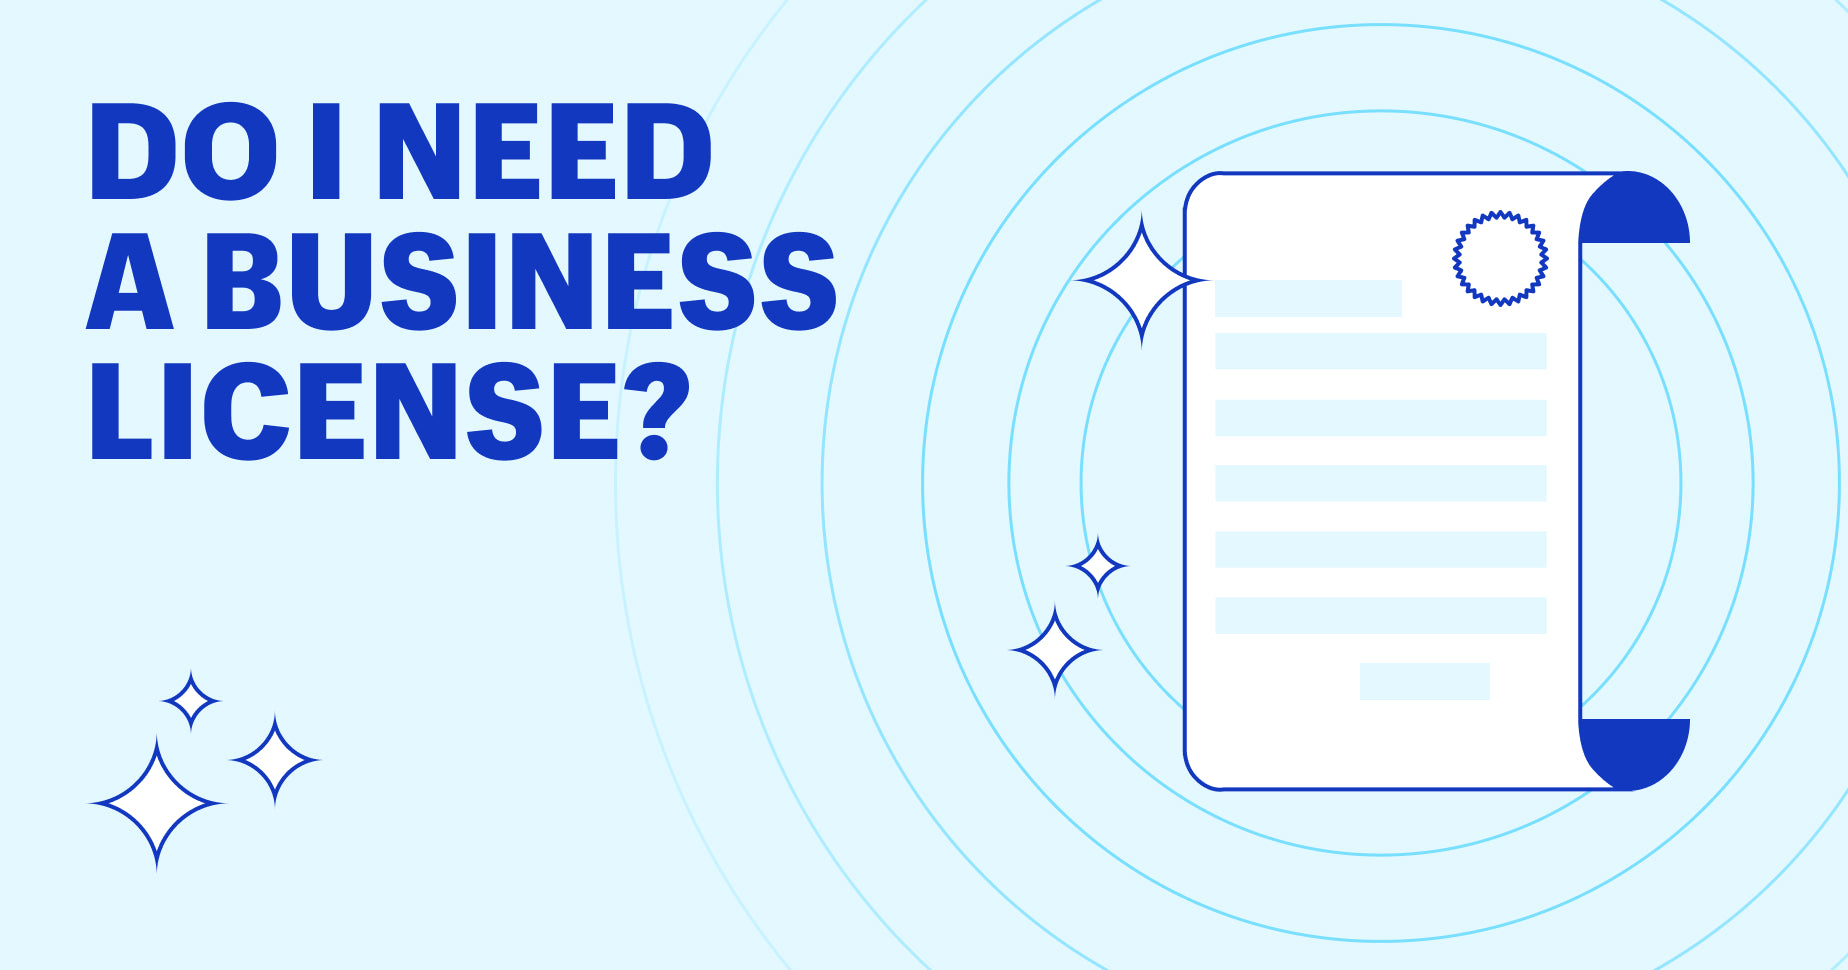 text that says "do I need a business license?" as well as a white vector image of a business license